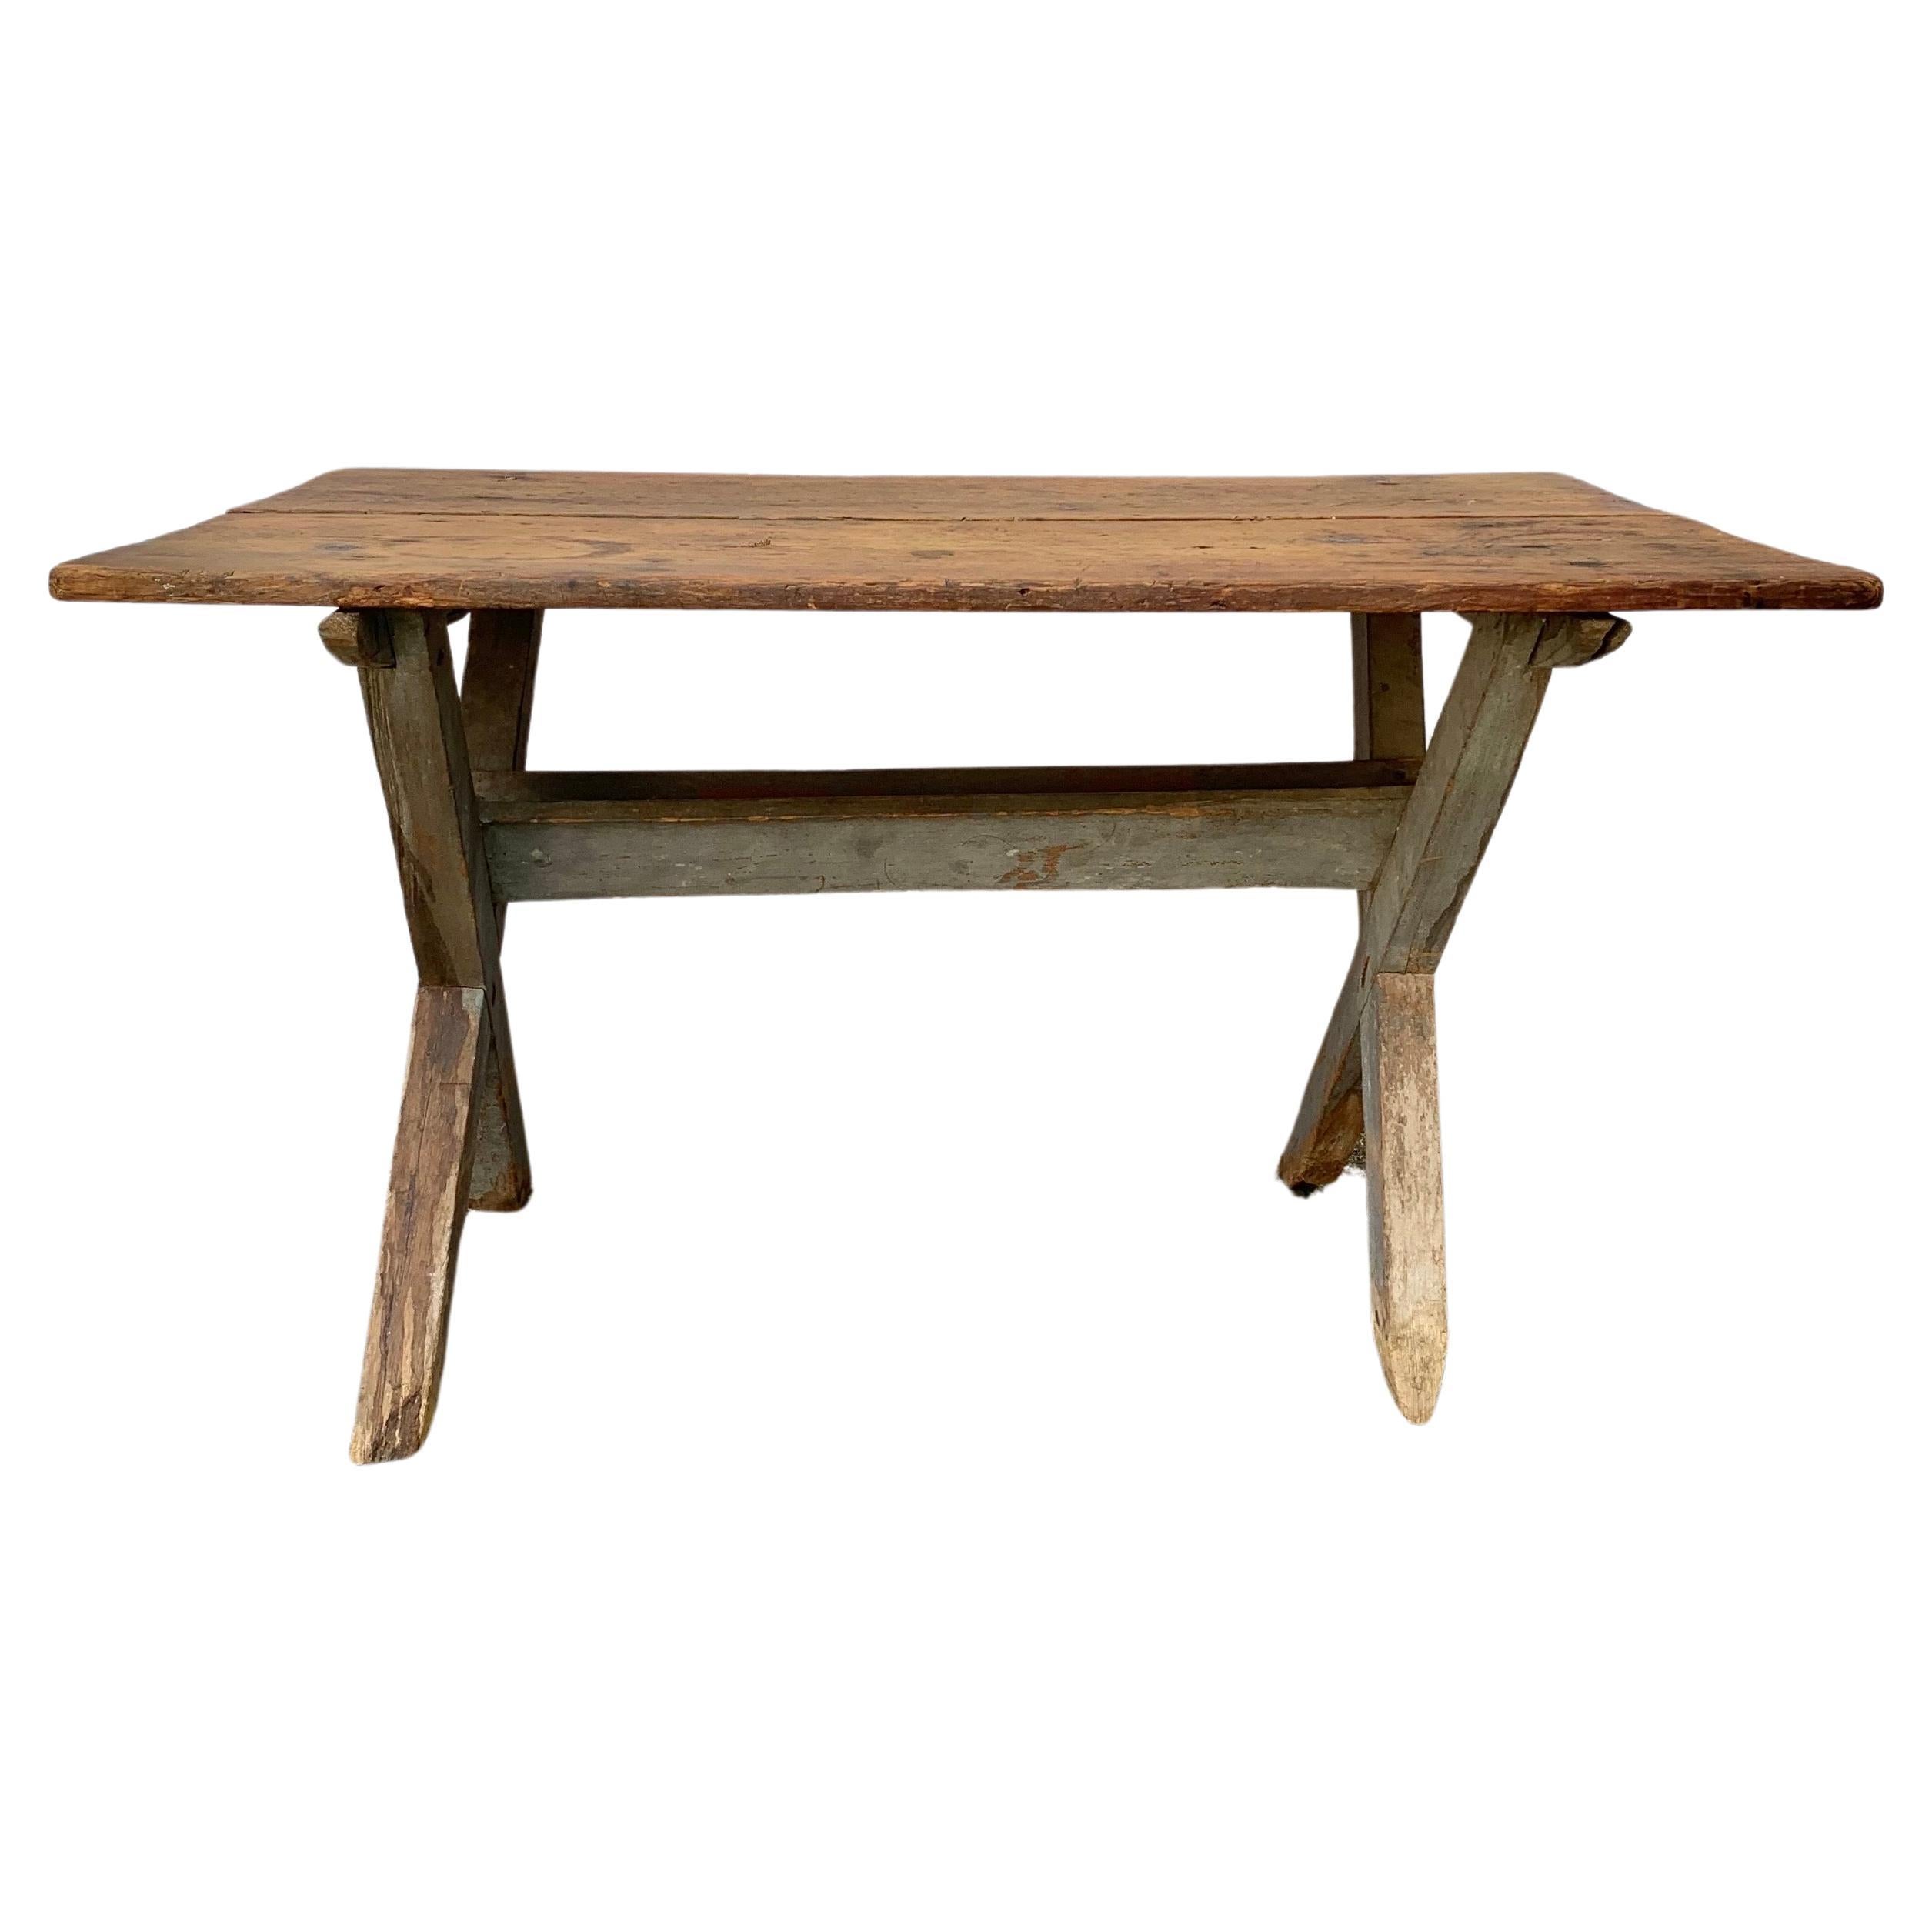 Found in the English countryside this Early 20th Century English Sawbuck Side Table was hand crafted by furniture artisans from old growth English Pine. This table features a two plank rectangular top sitting above a patinated simple X-form base